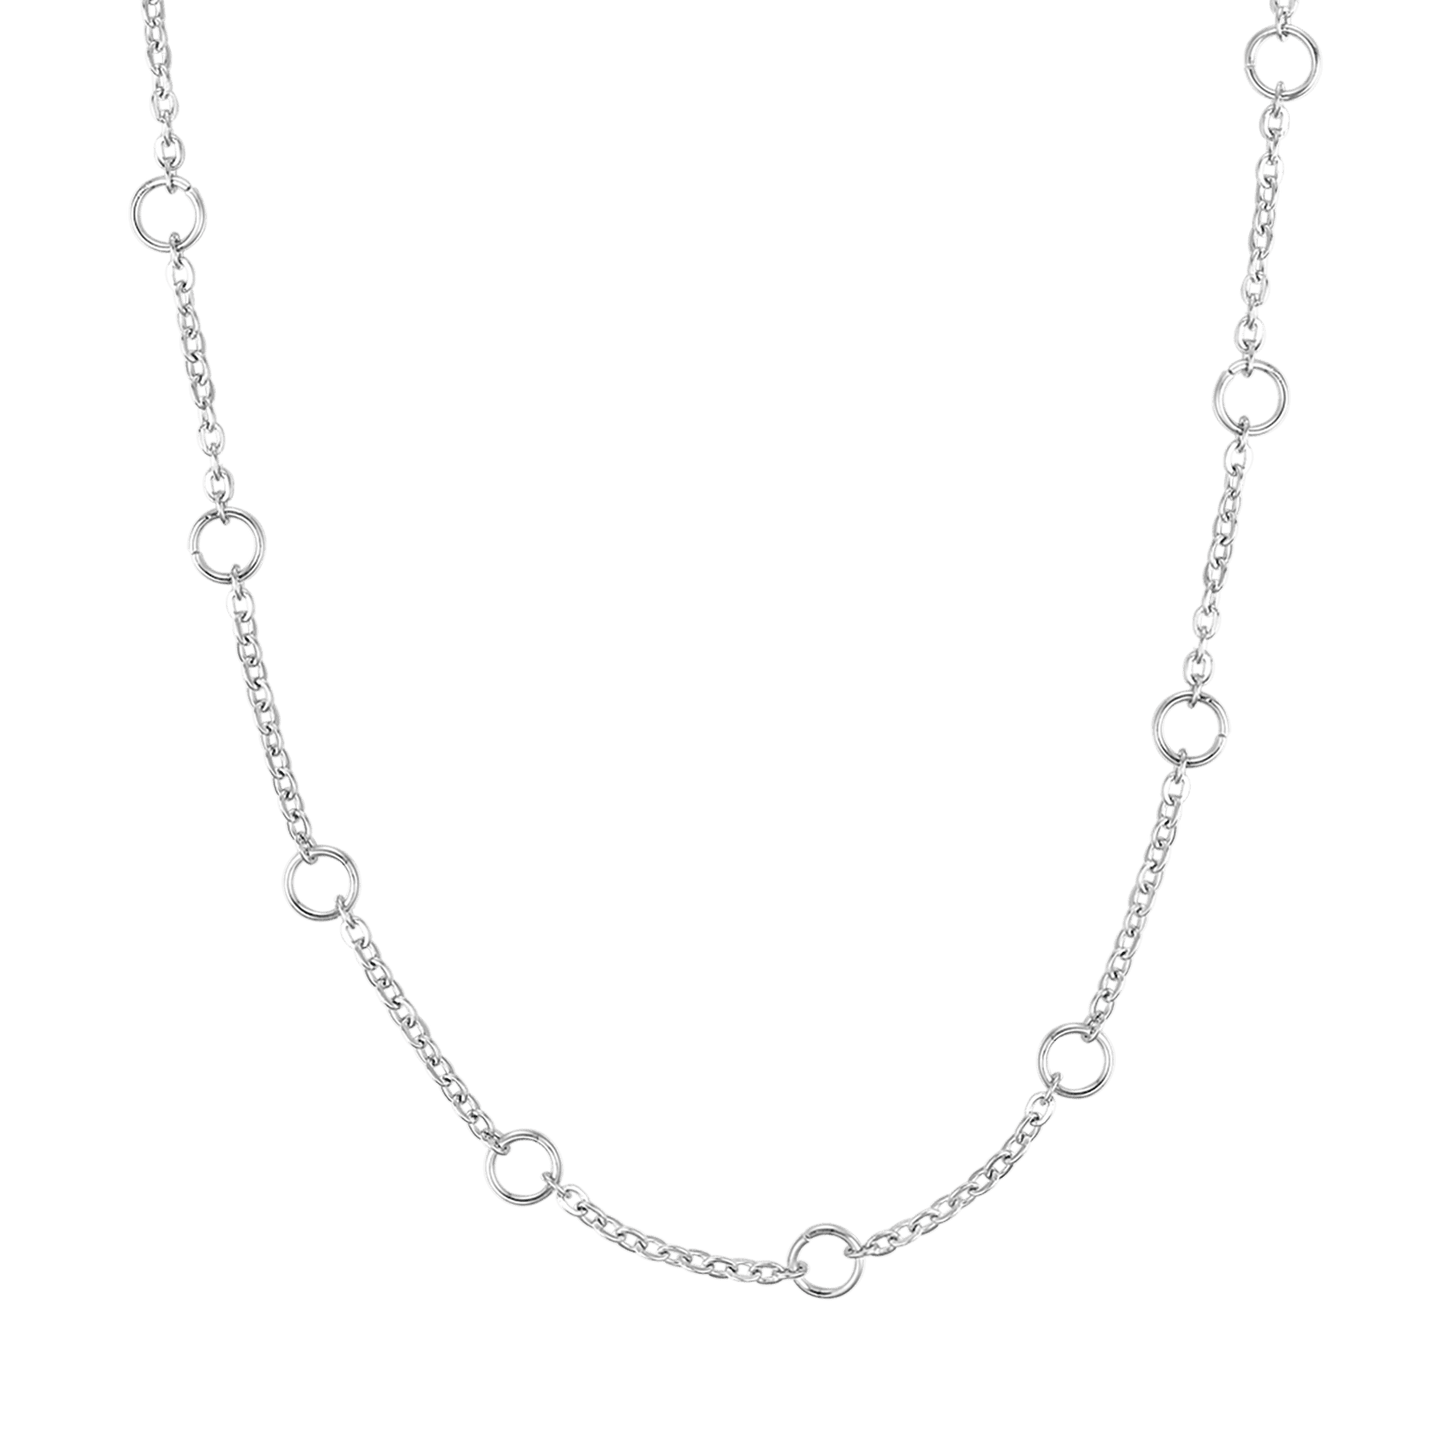 WOMEN'S STEEL NECKLACE FOR CHARMS WITH LOBSTER CLASP